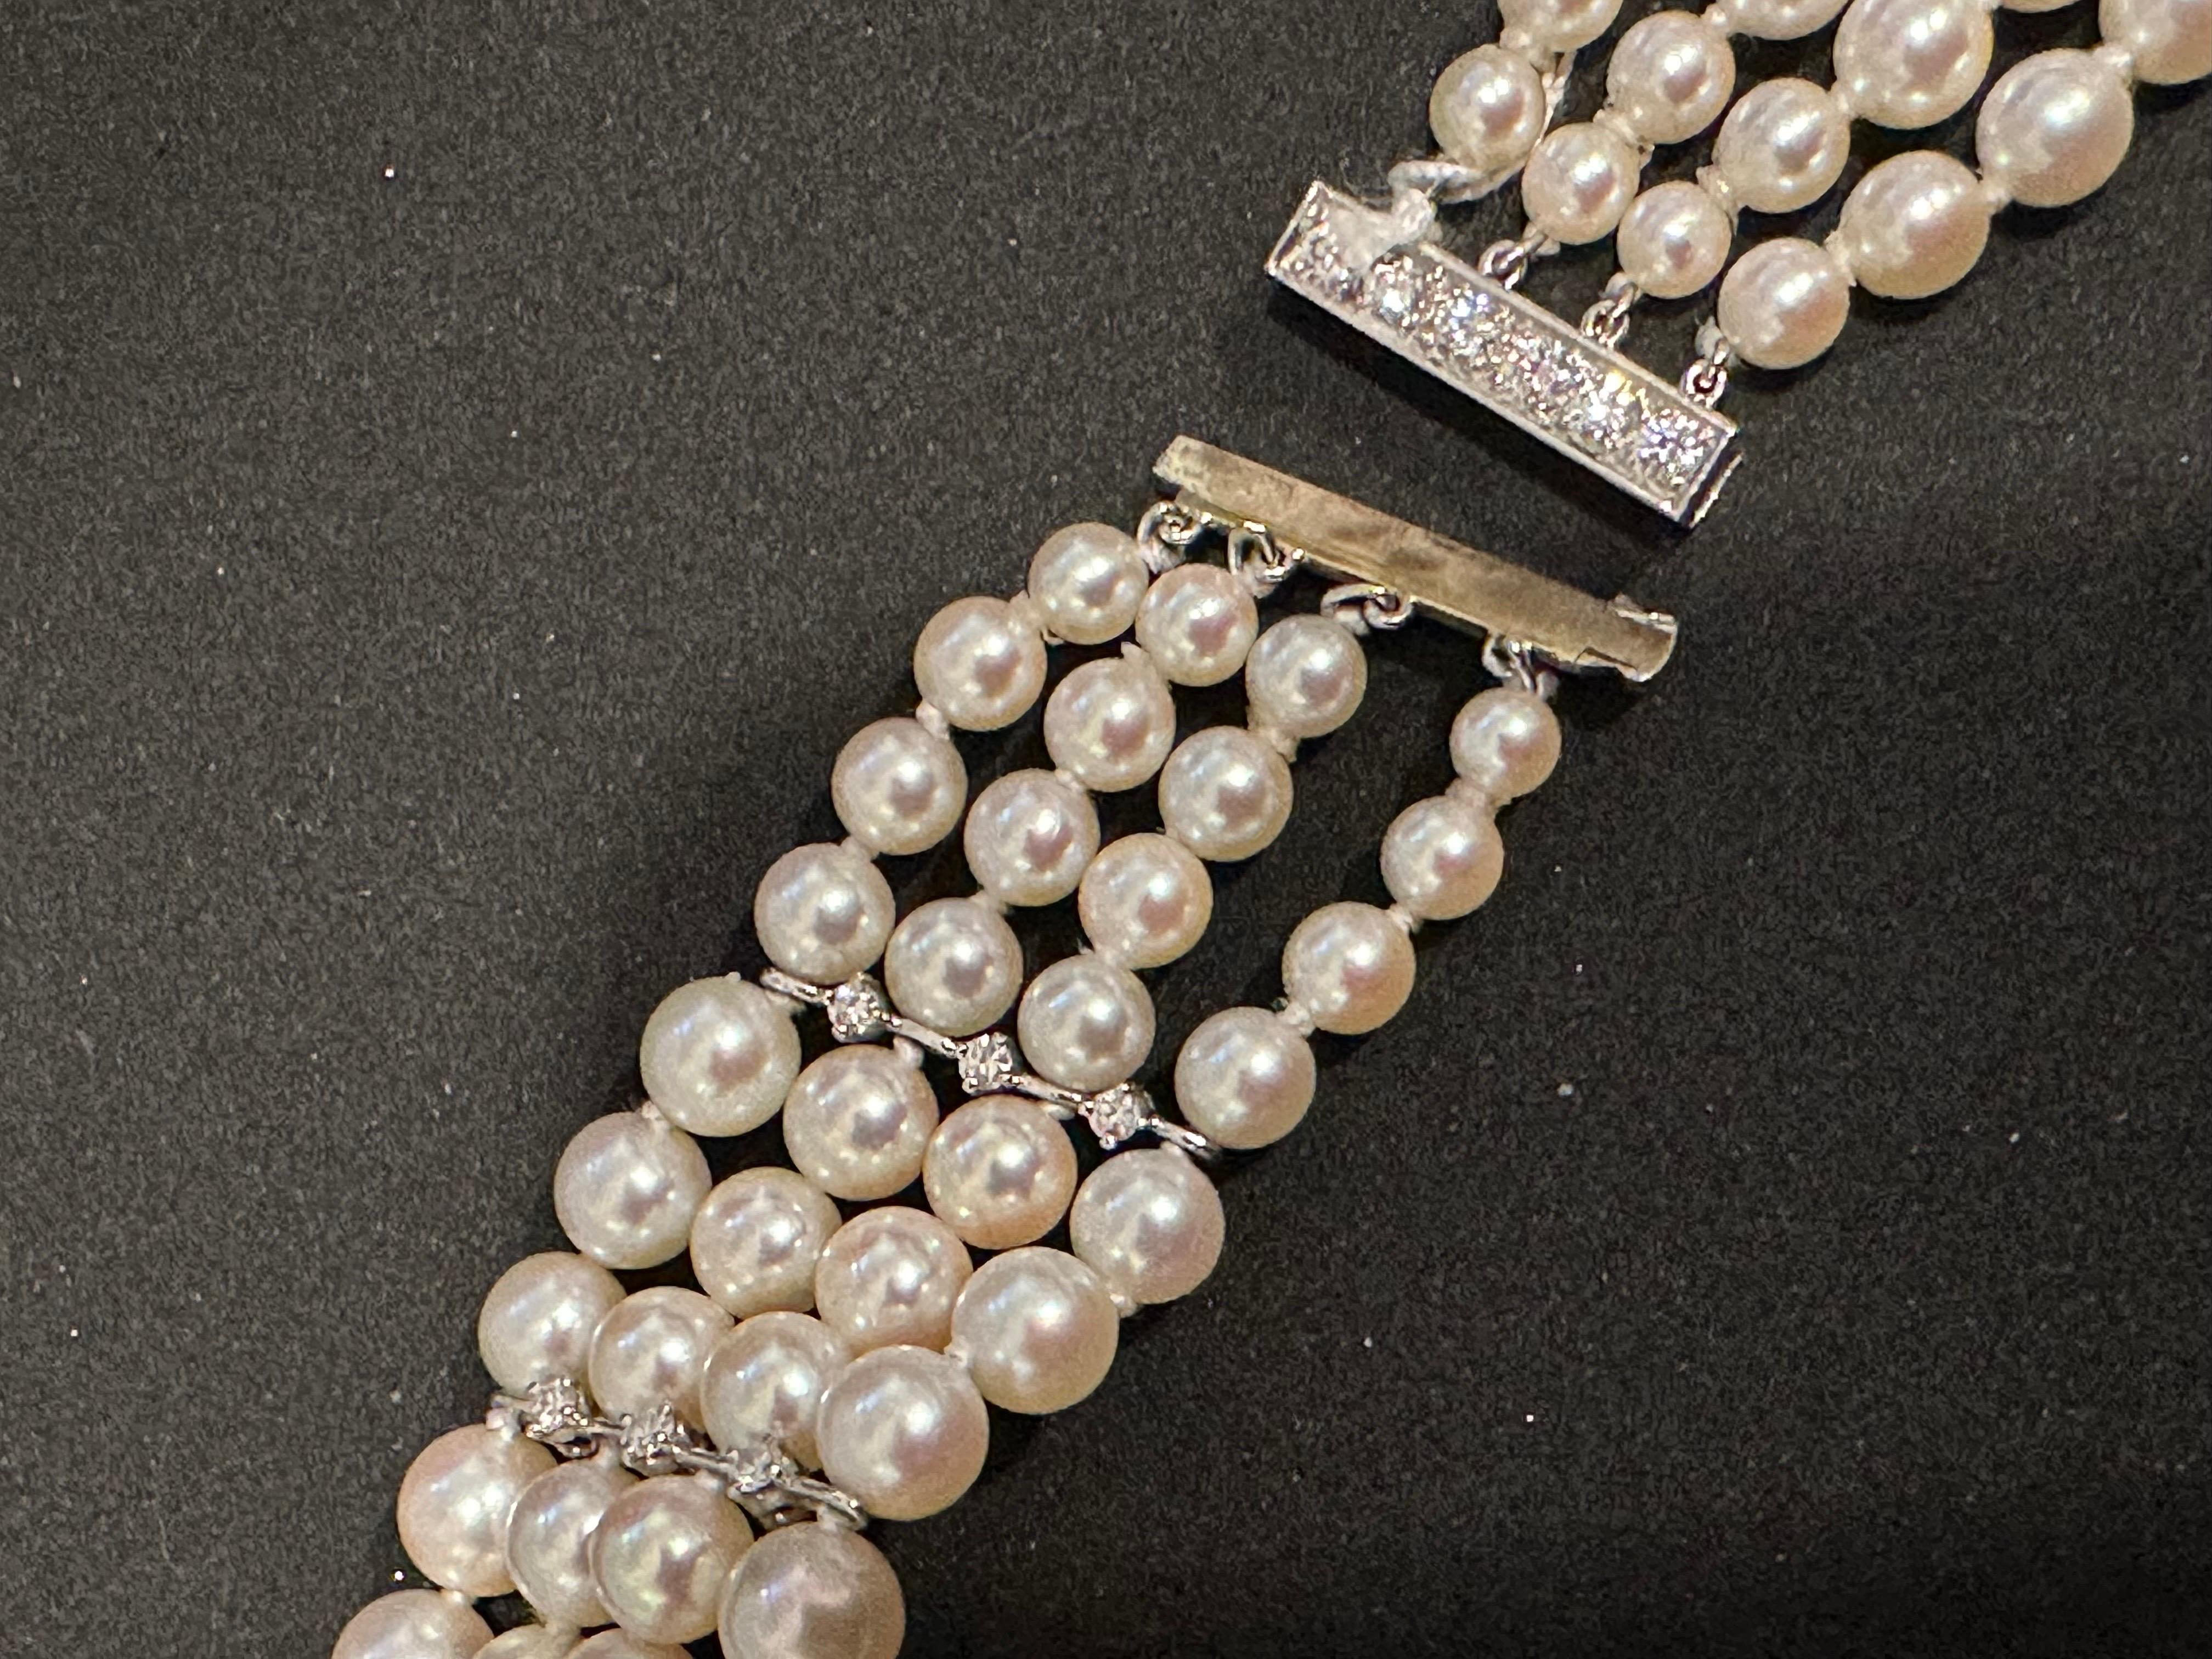 Antique 14.5ct Diamond Center Brooch  with Pearls Necklace in Platinum Bridal For Sale 8